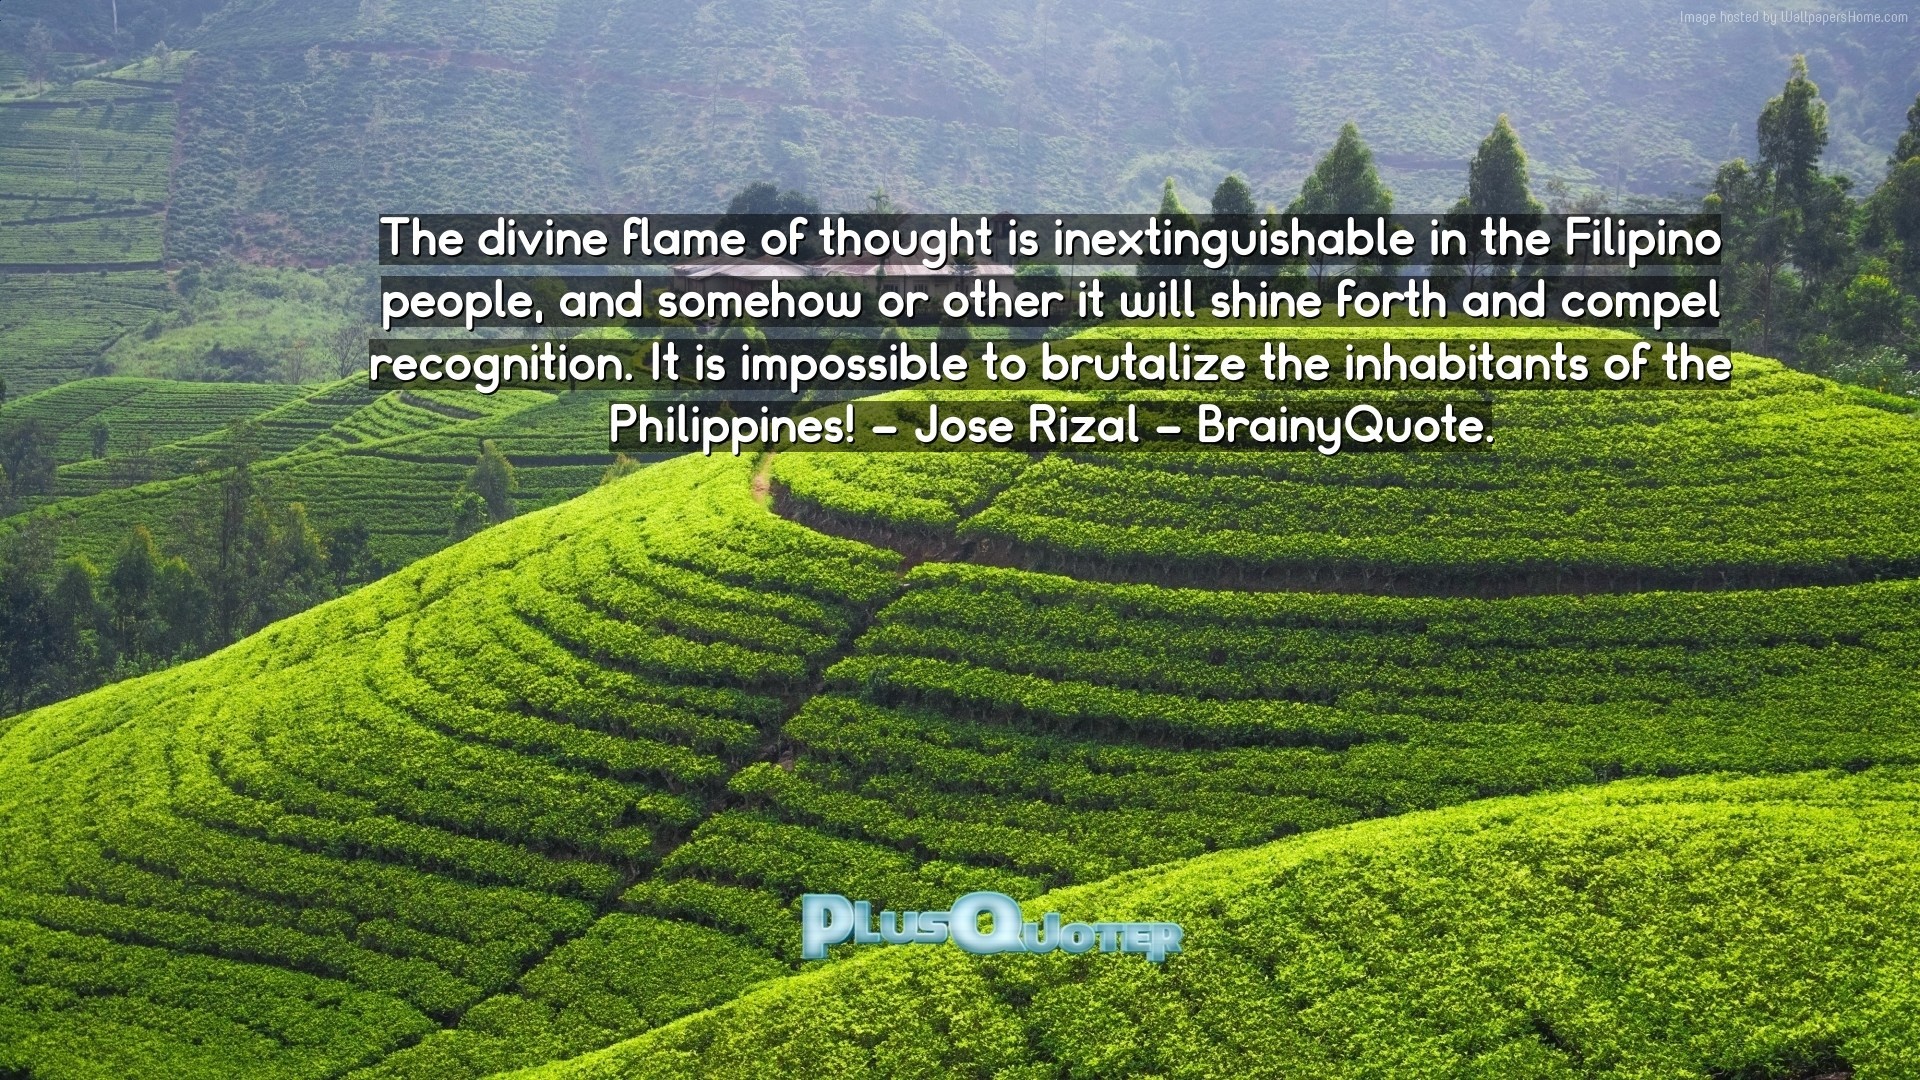 Download Wallpaper With Inspirational Quotes The Divine - Banaue Rice Terraces Quotes - HD Wallpaper 